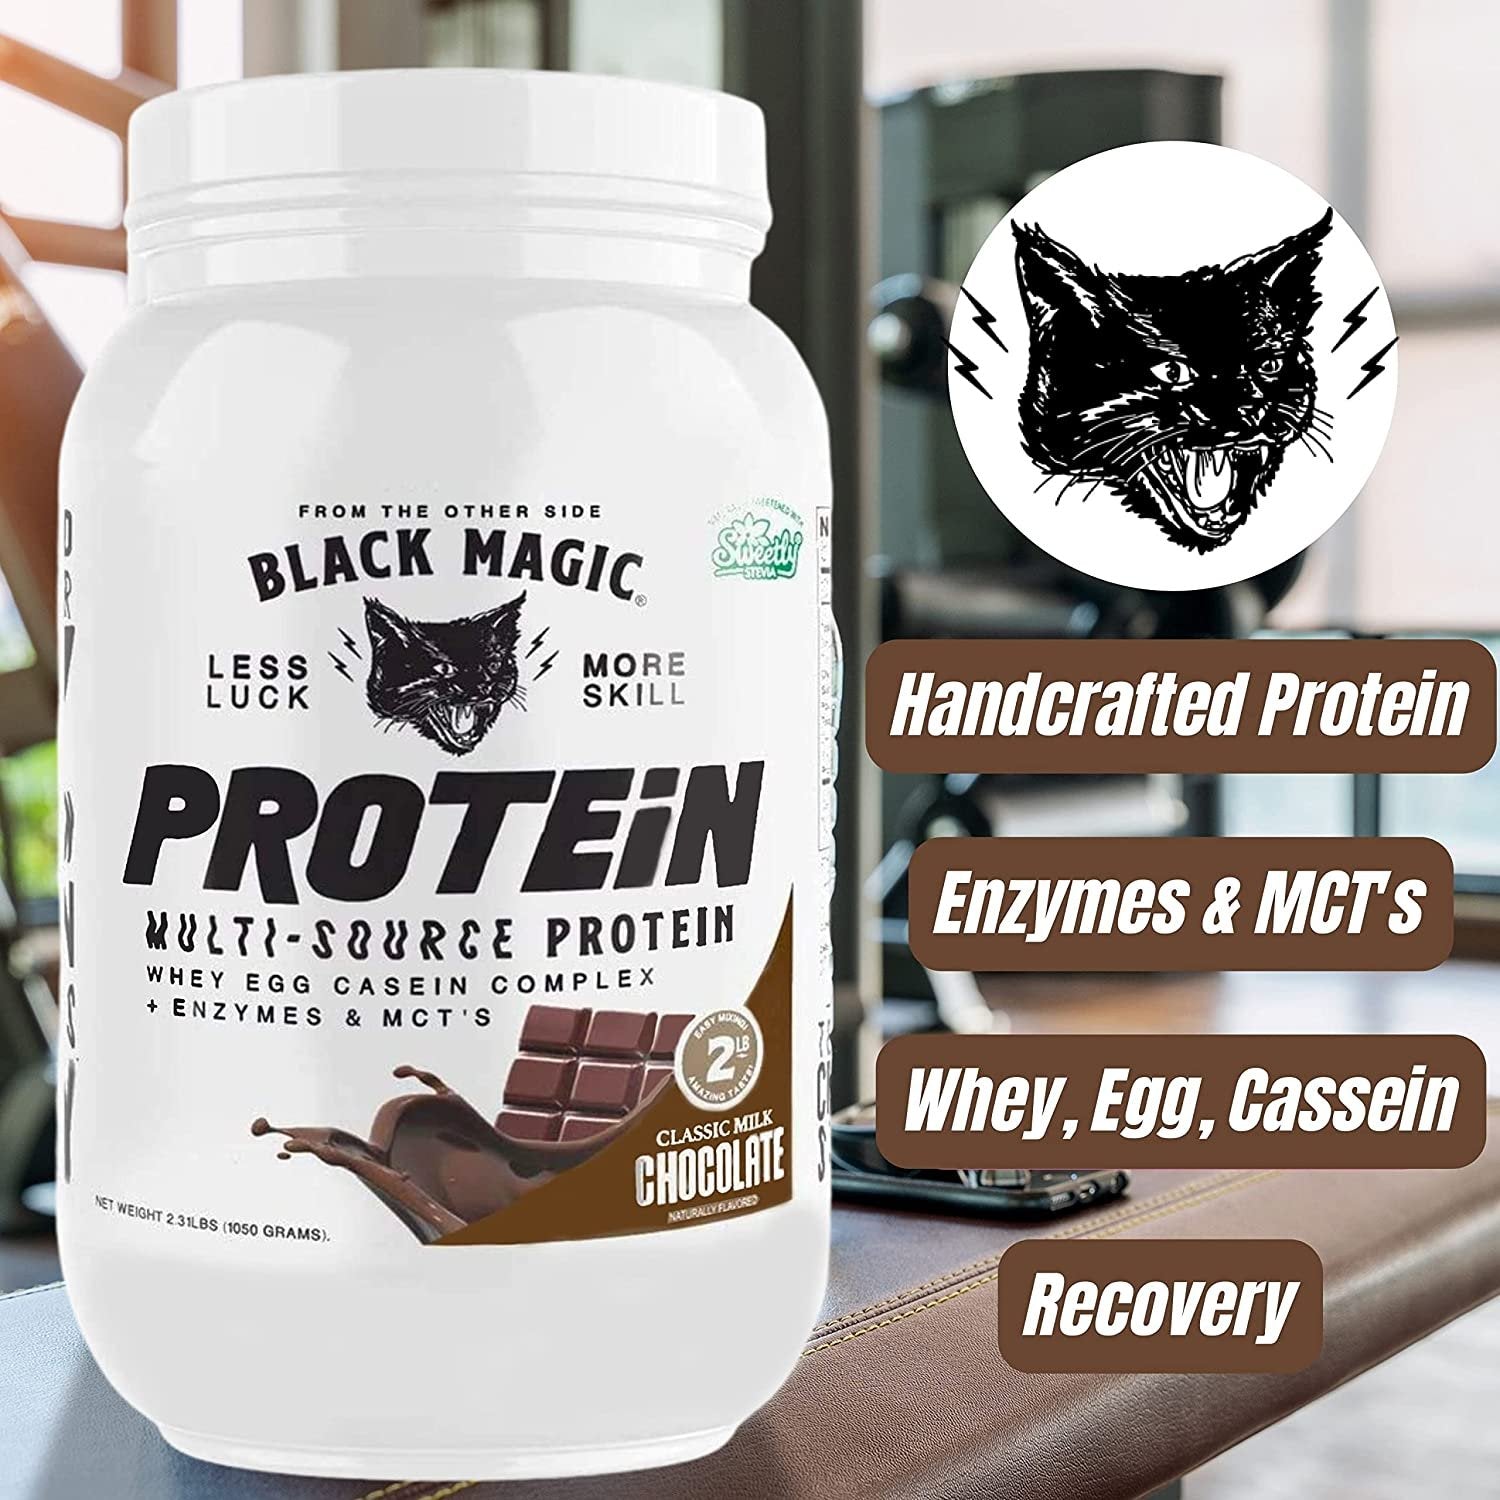 Milk Chocolate Black Magic Multi-Source Protein - Whey, Egg, and Casein Complex with Enzymes & MCT Powder - Pre Workout and Post Workout - 24g Protein - 2 LB with Bonus Key Chain